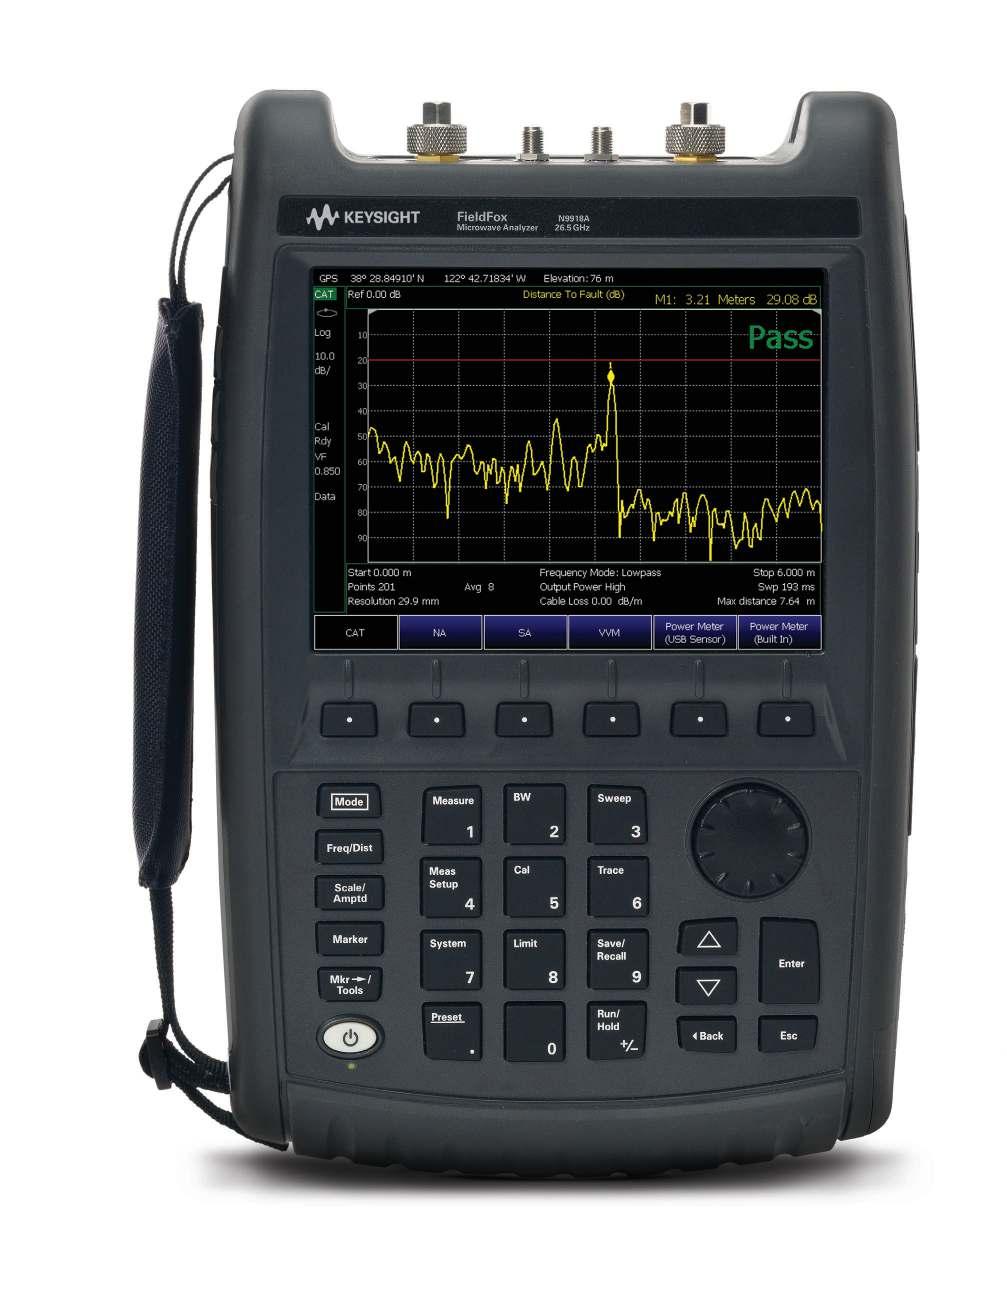 04 Keysight Performing Line Sweep Measurements with FieldFox Cable and Antenna Analyzers - Technical Overview Pick up FieldFox for its ergonomics N9913A/14A/15A/16A/17A/18A Portrait design and large